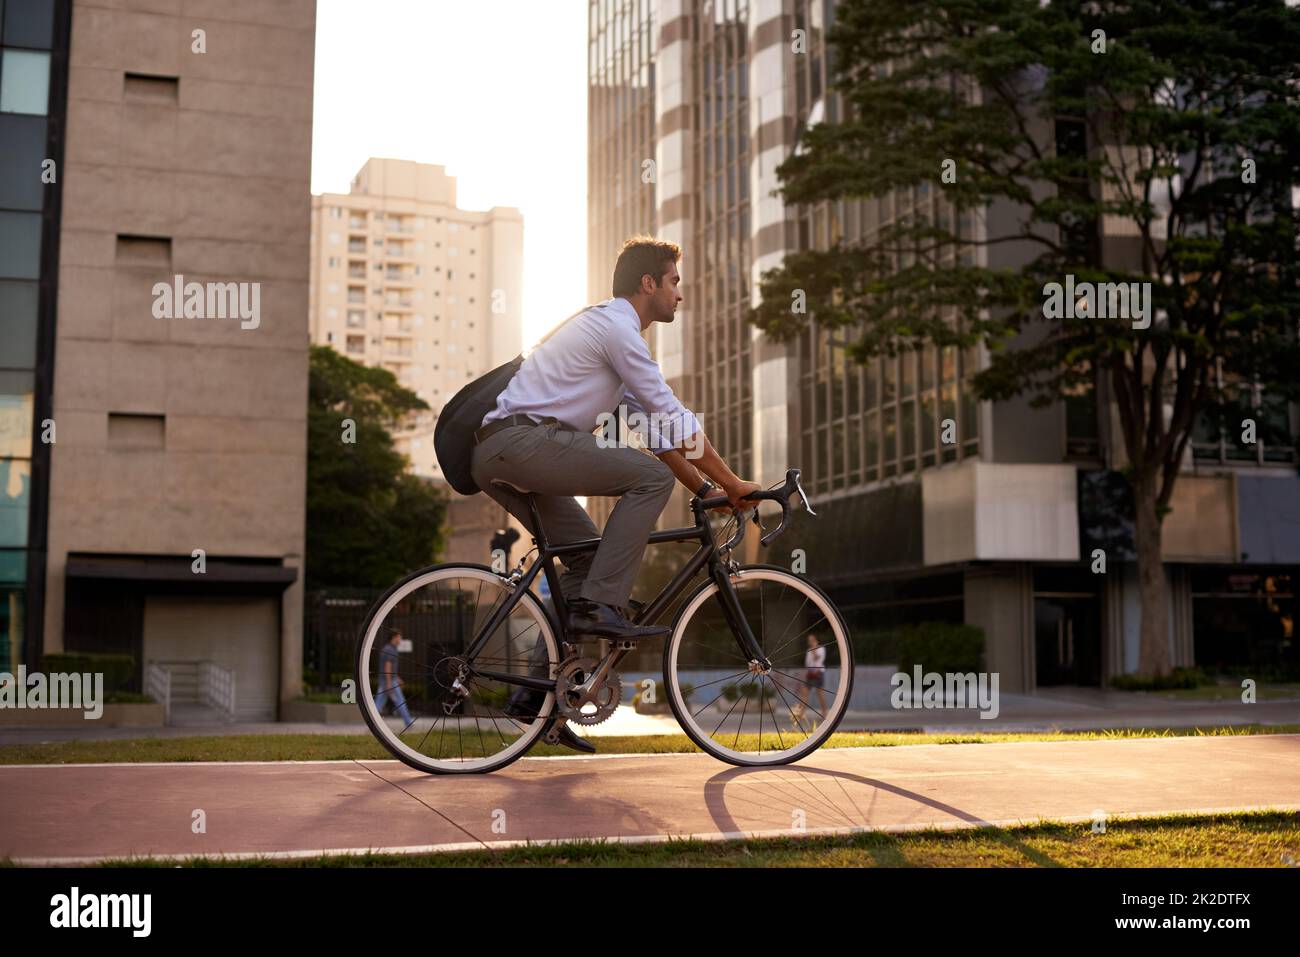 Commuting the carbon-free way. Shot of a businessman commuting to work with his bicycle. Stock Photo